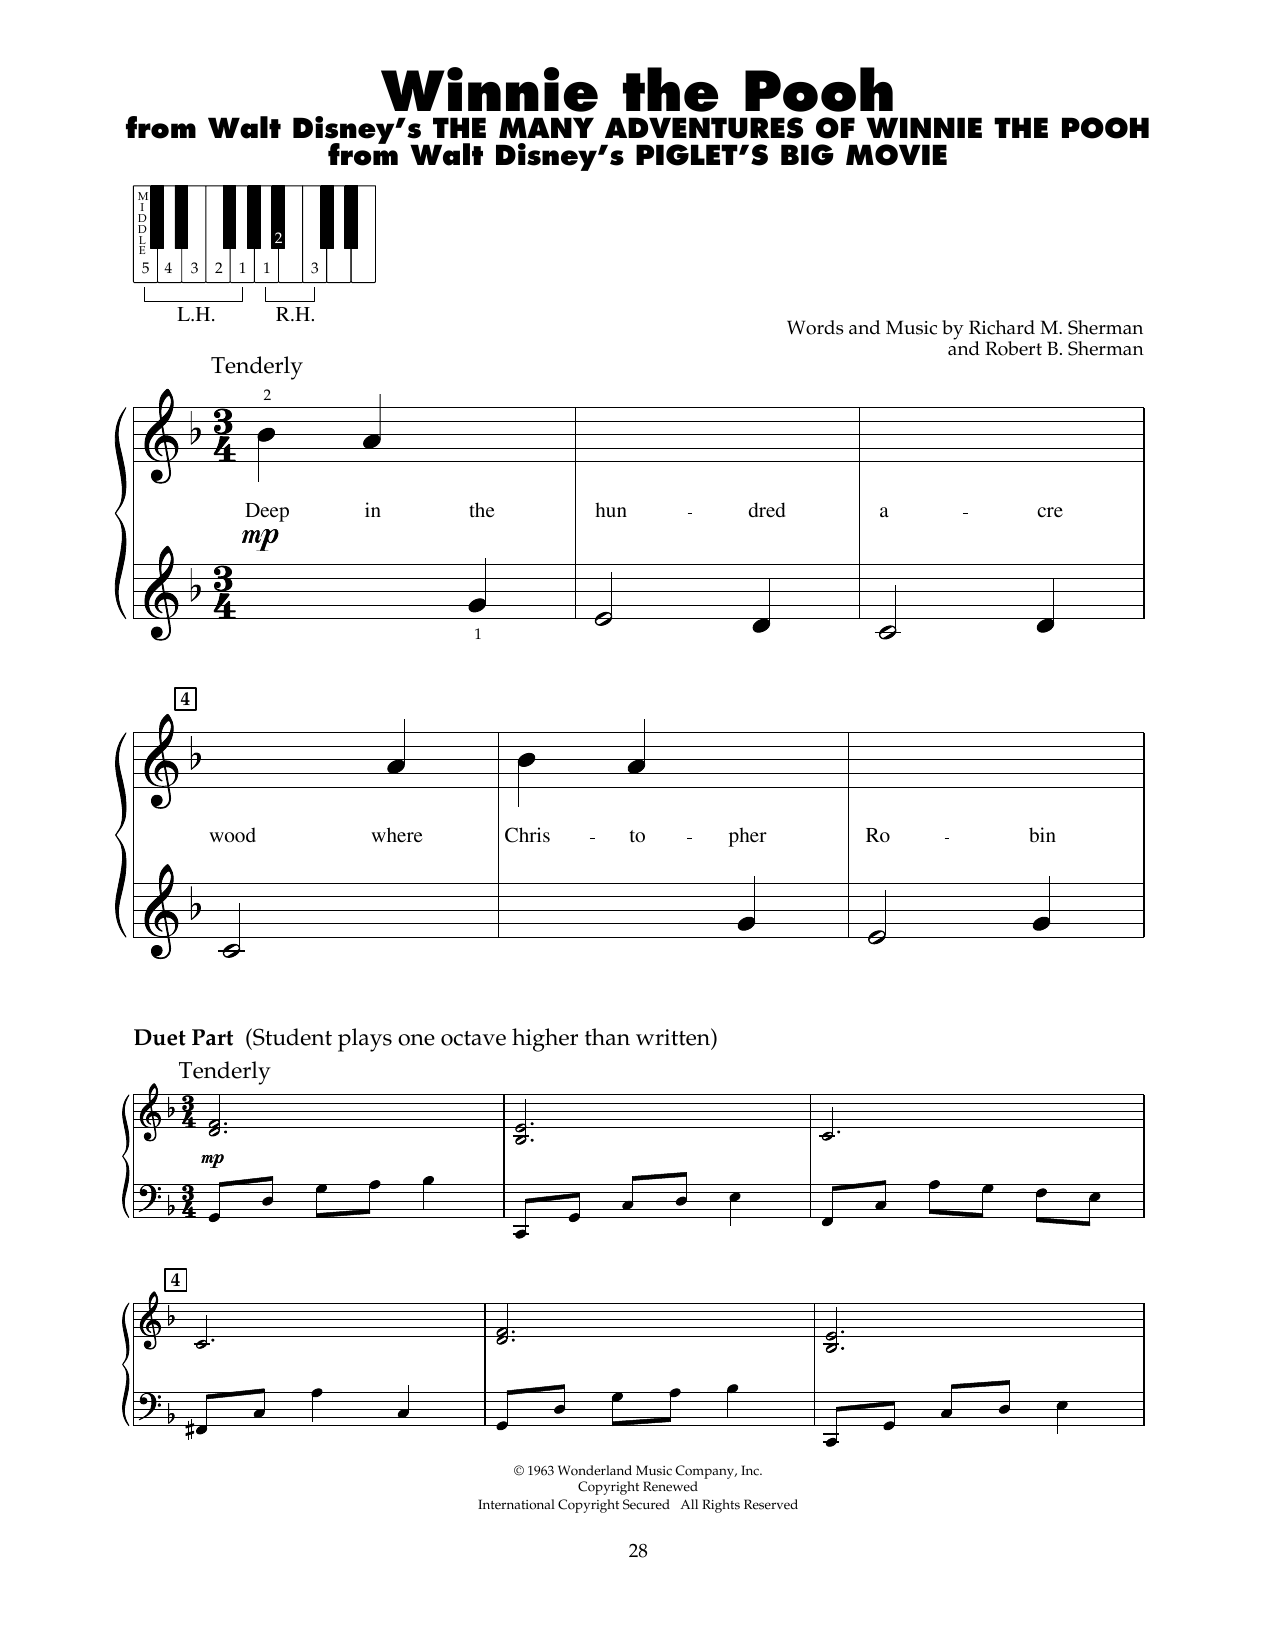 Download Sherman Brothers Winnie The Pooh (from The Many Adventur Sheet Music